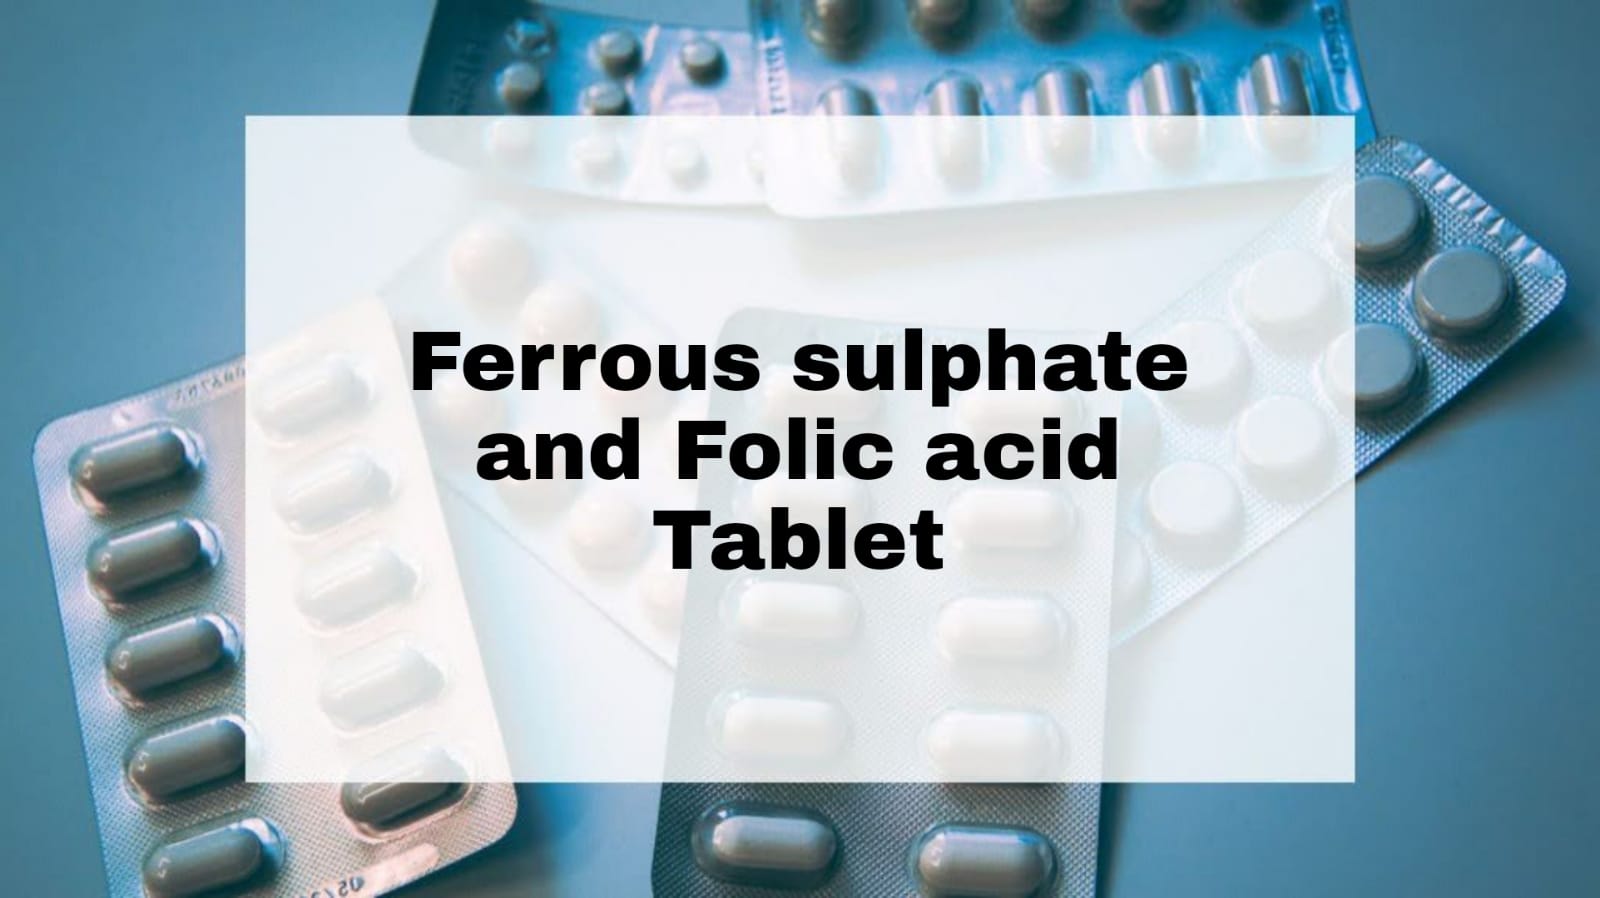 Ferrous sulphate and Folic acid Tablet